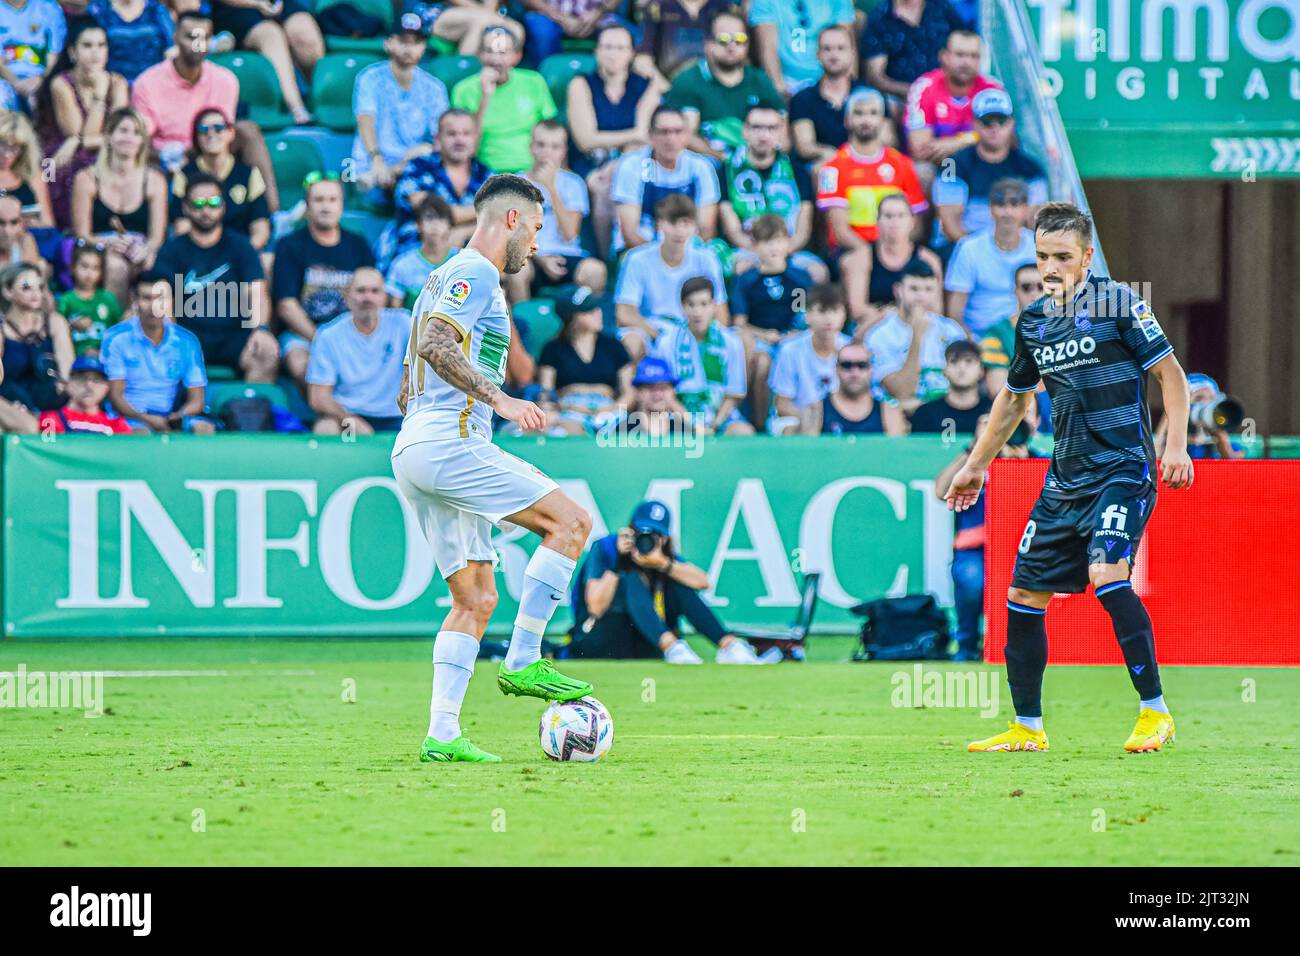 ELCHE, SPAIN - AUGUST 27:Tete Morente of Elche CF and Andoni Gorosabel of Real Sociedad during the match between Elche CF and Real Sociedad de Futbol of La Liga Santander on August 27, 2022 at Martínez Valero in Elche, Spain. (Photo by Samuel Carreño/ PX Images) Stock Photo